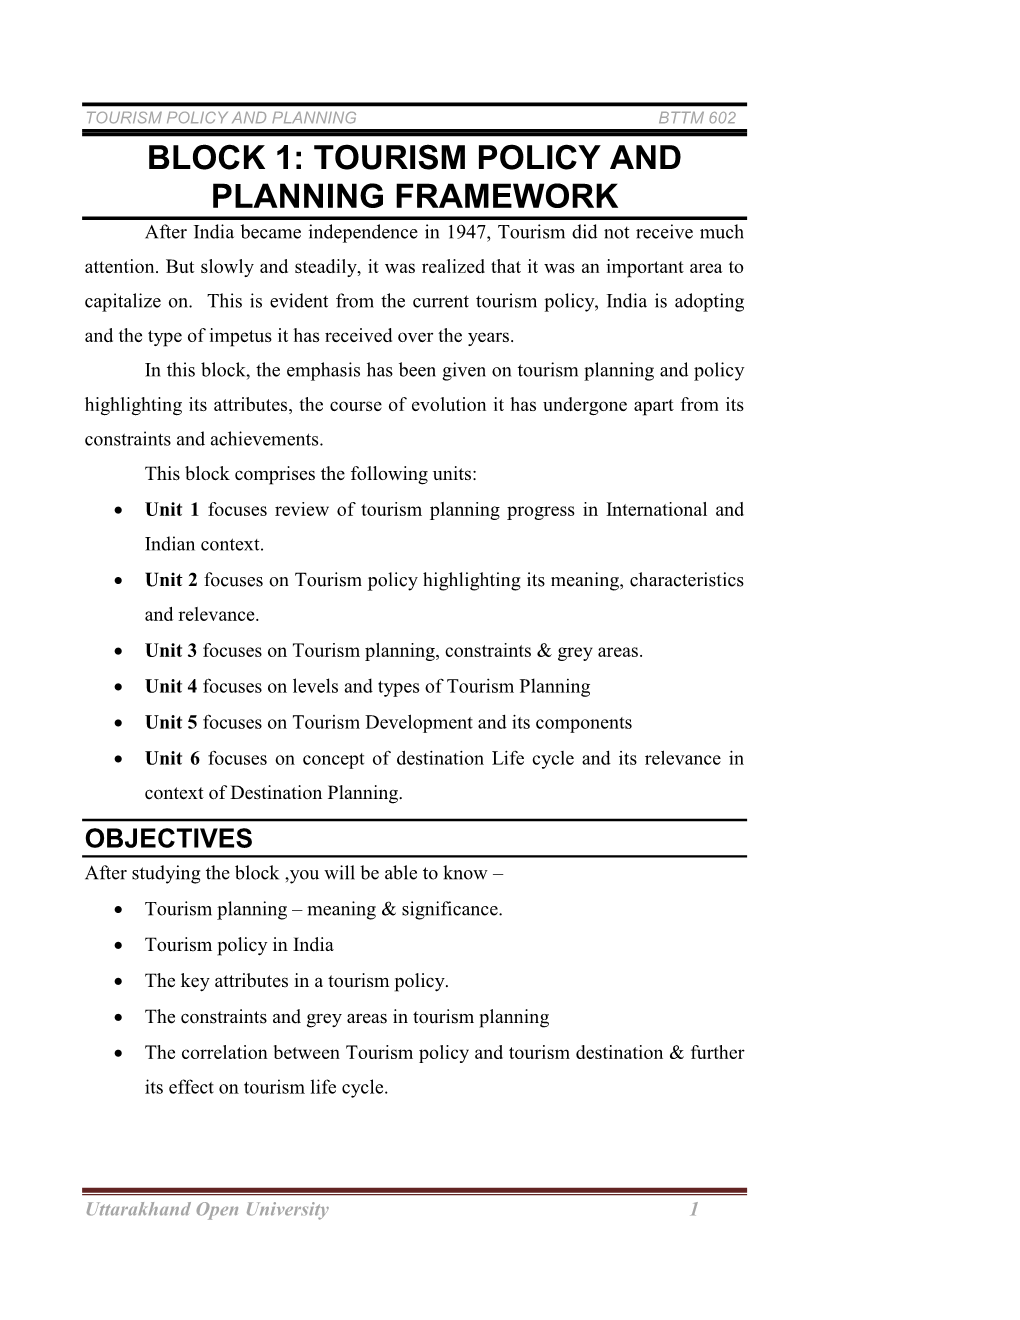 BLOCK 1: TOURISM POLICY and PLANNING FRAMEWORK After India Became Independence in 1947, Tourism Did Not Receive Much Attention